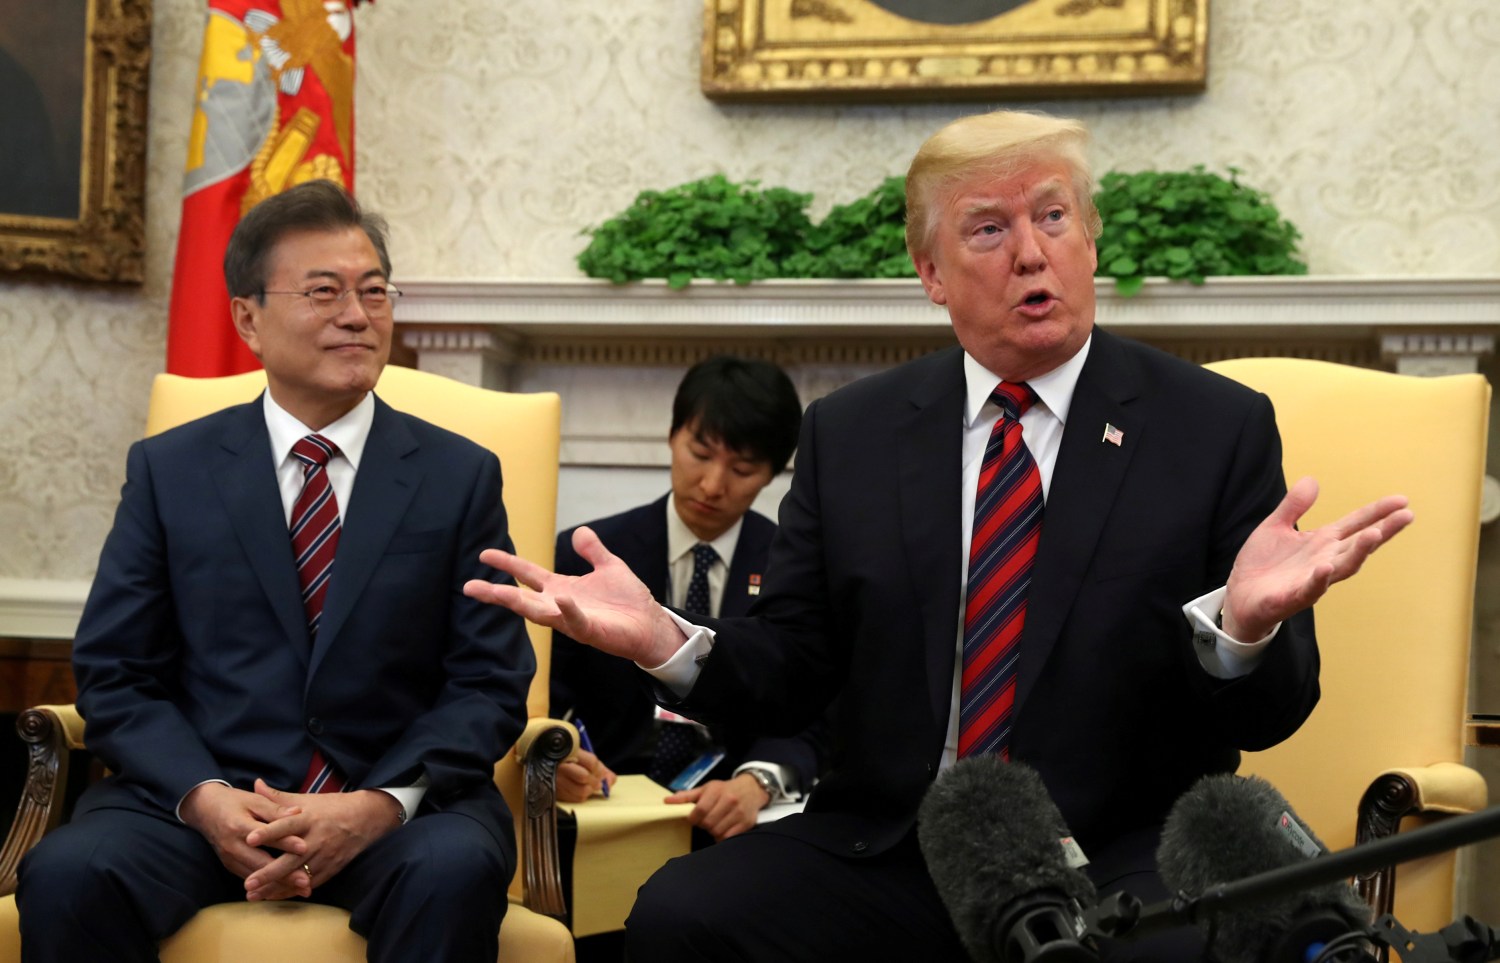 U.S. President Donald Trump gestures as he welcomes South Korea's President Moon Jae-In in the Oval Office of the White House in Washington, U.S., May 22, 2018. REUTERS/Kevin Lamarque - RC1CC2C4EAA0